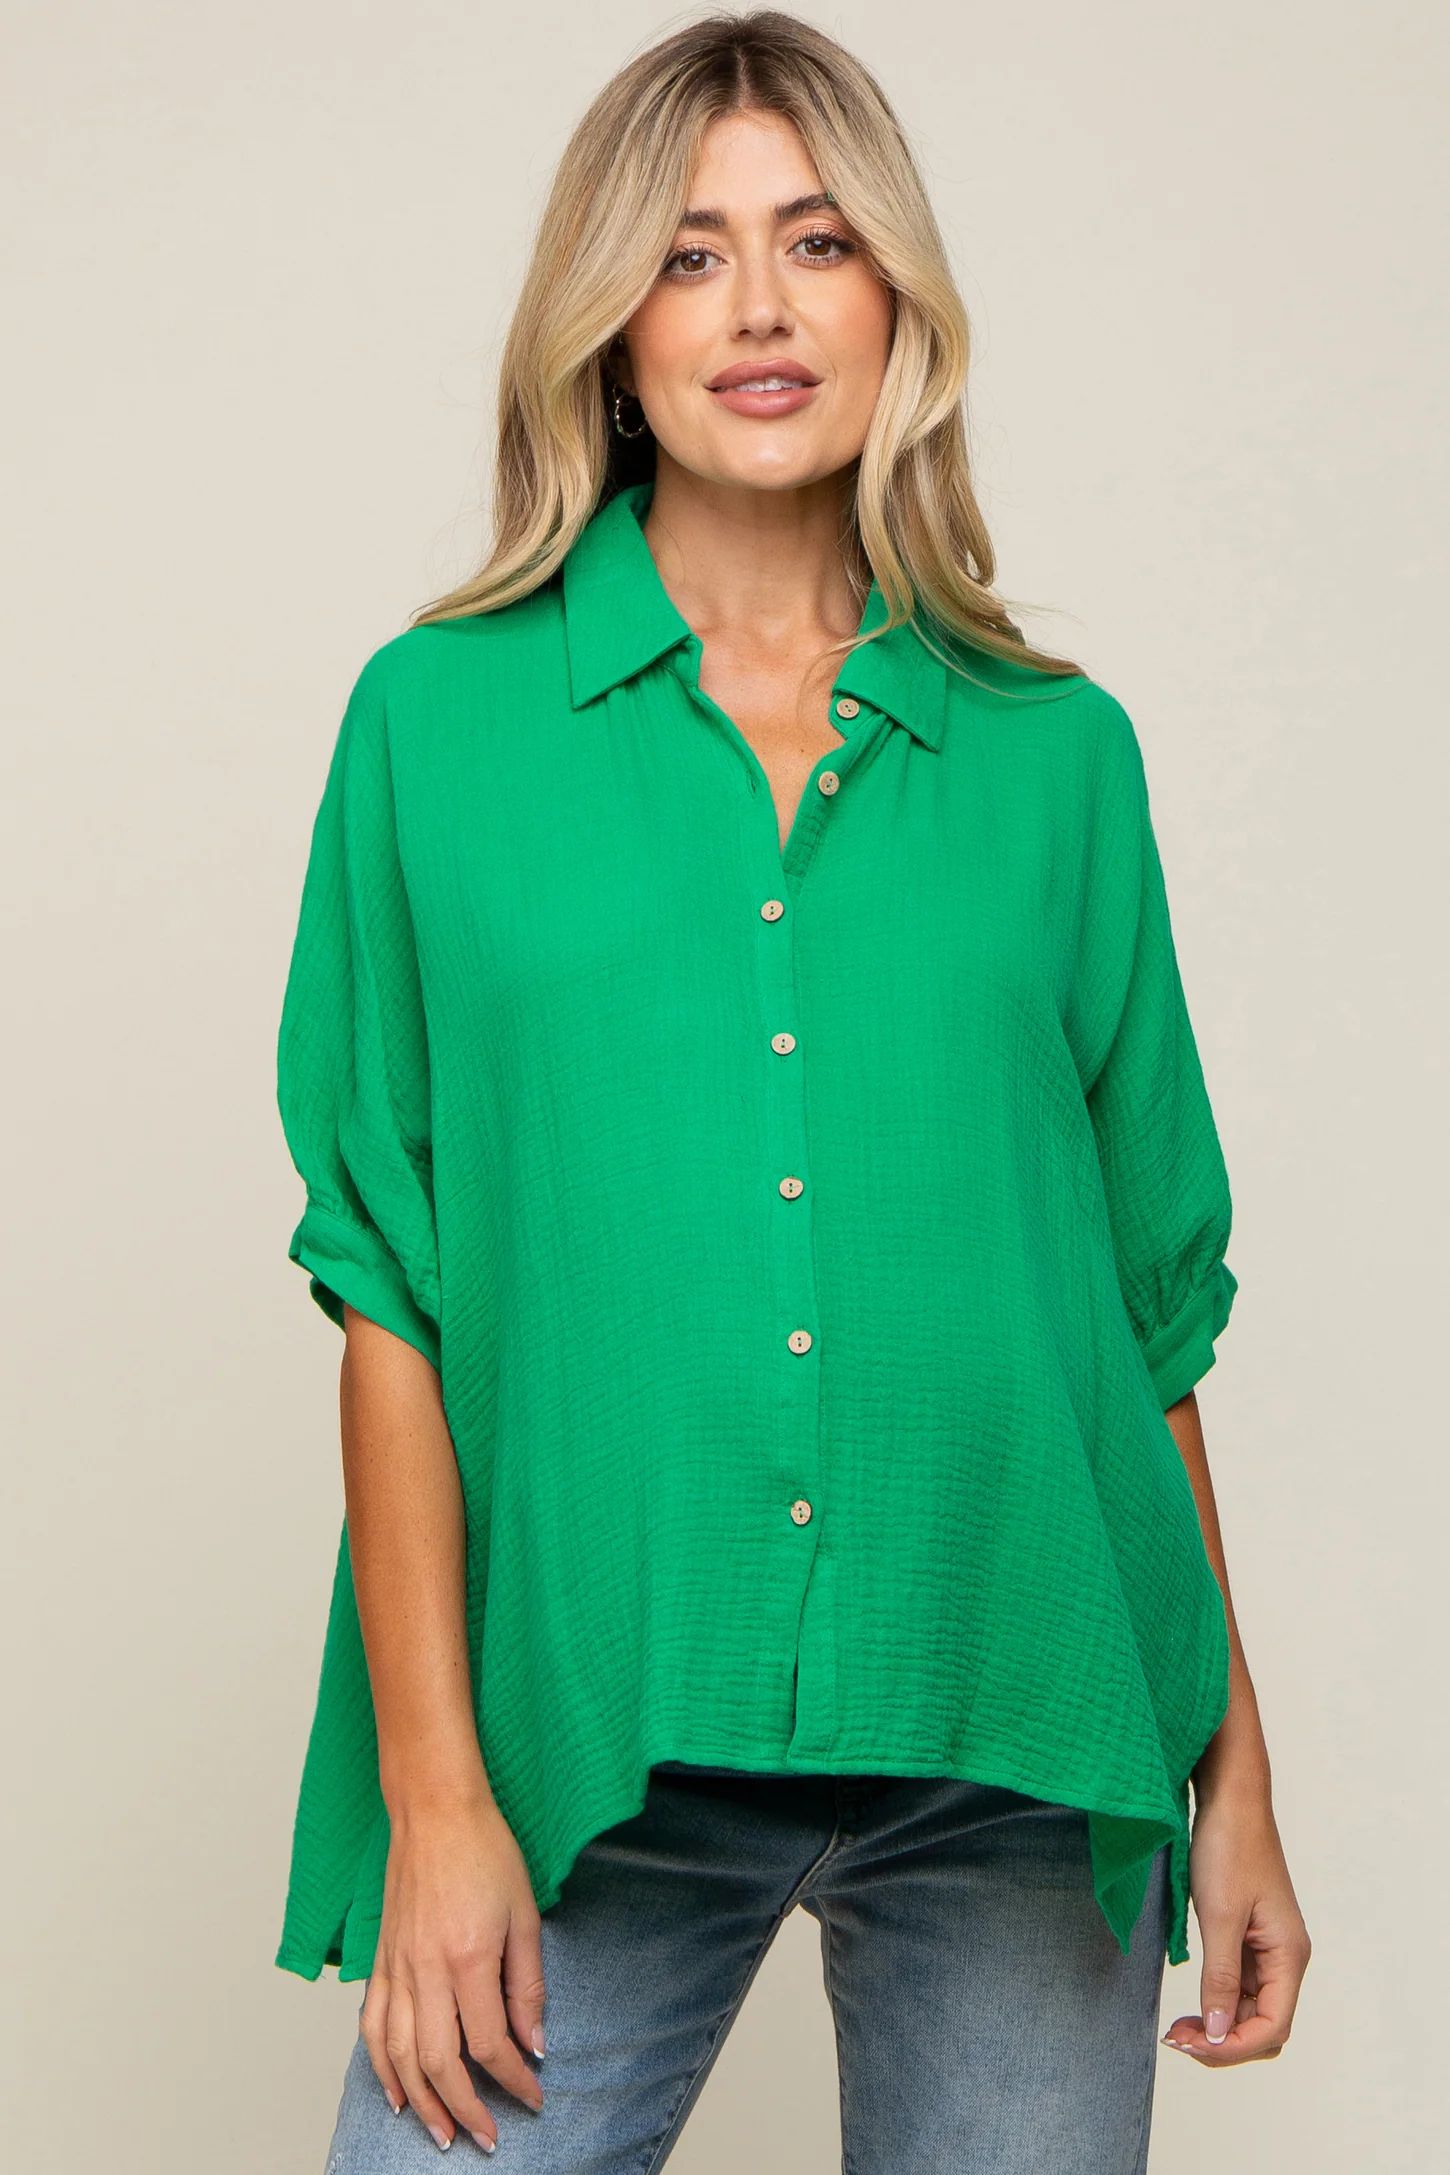 Green Button Down Collared Maternity Top | PinkBlush Maternity